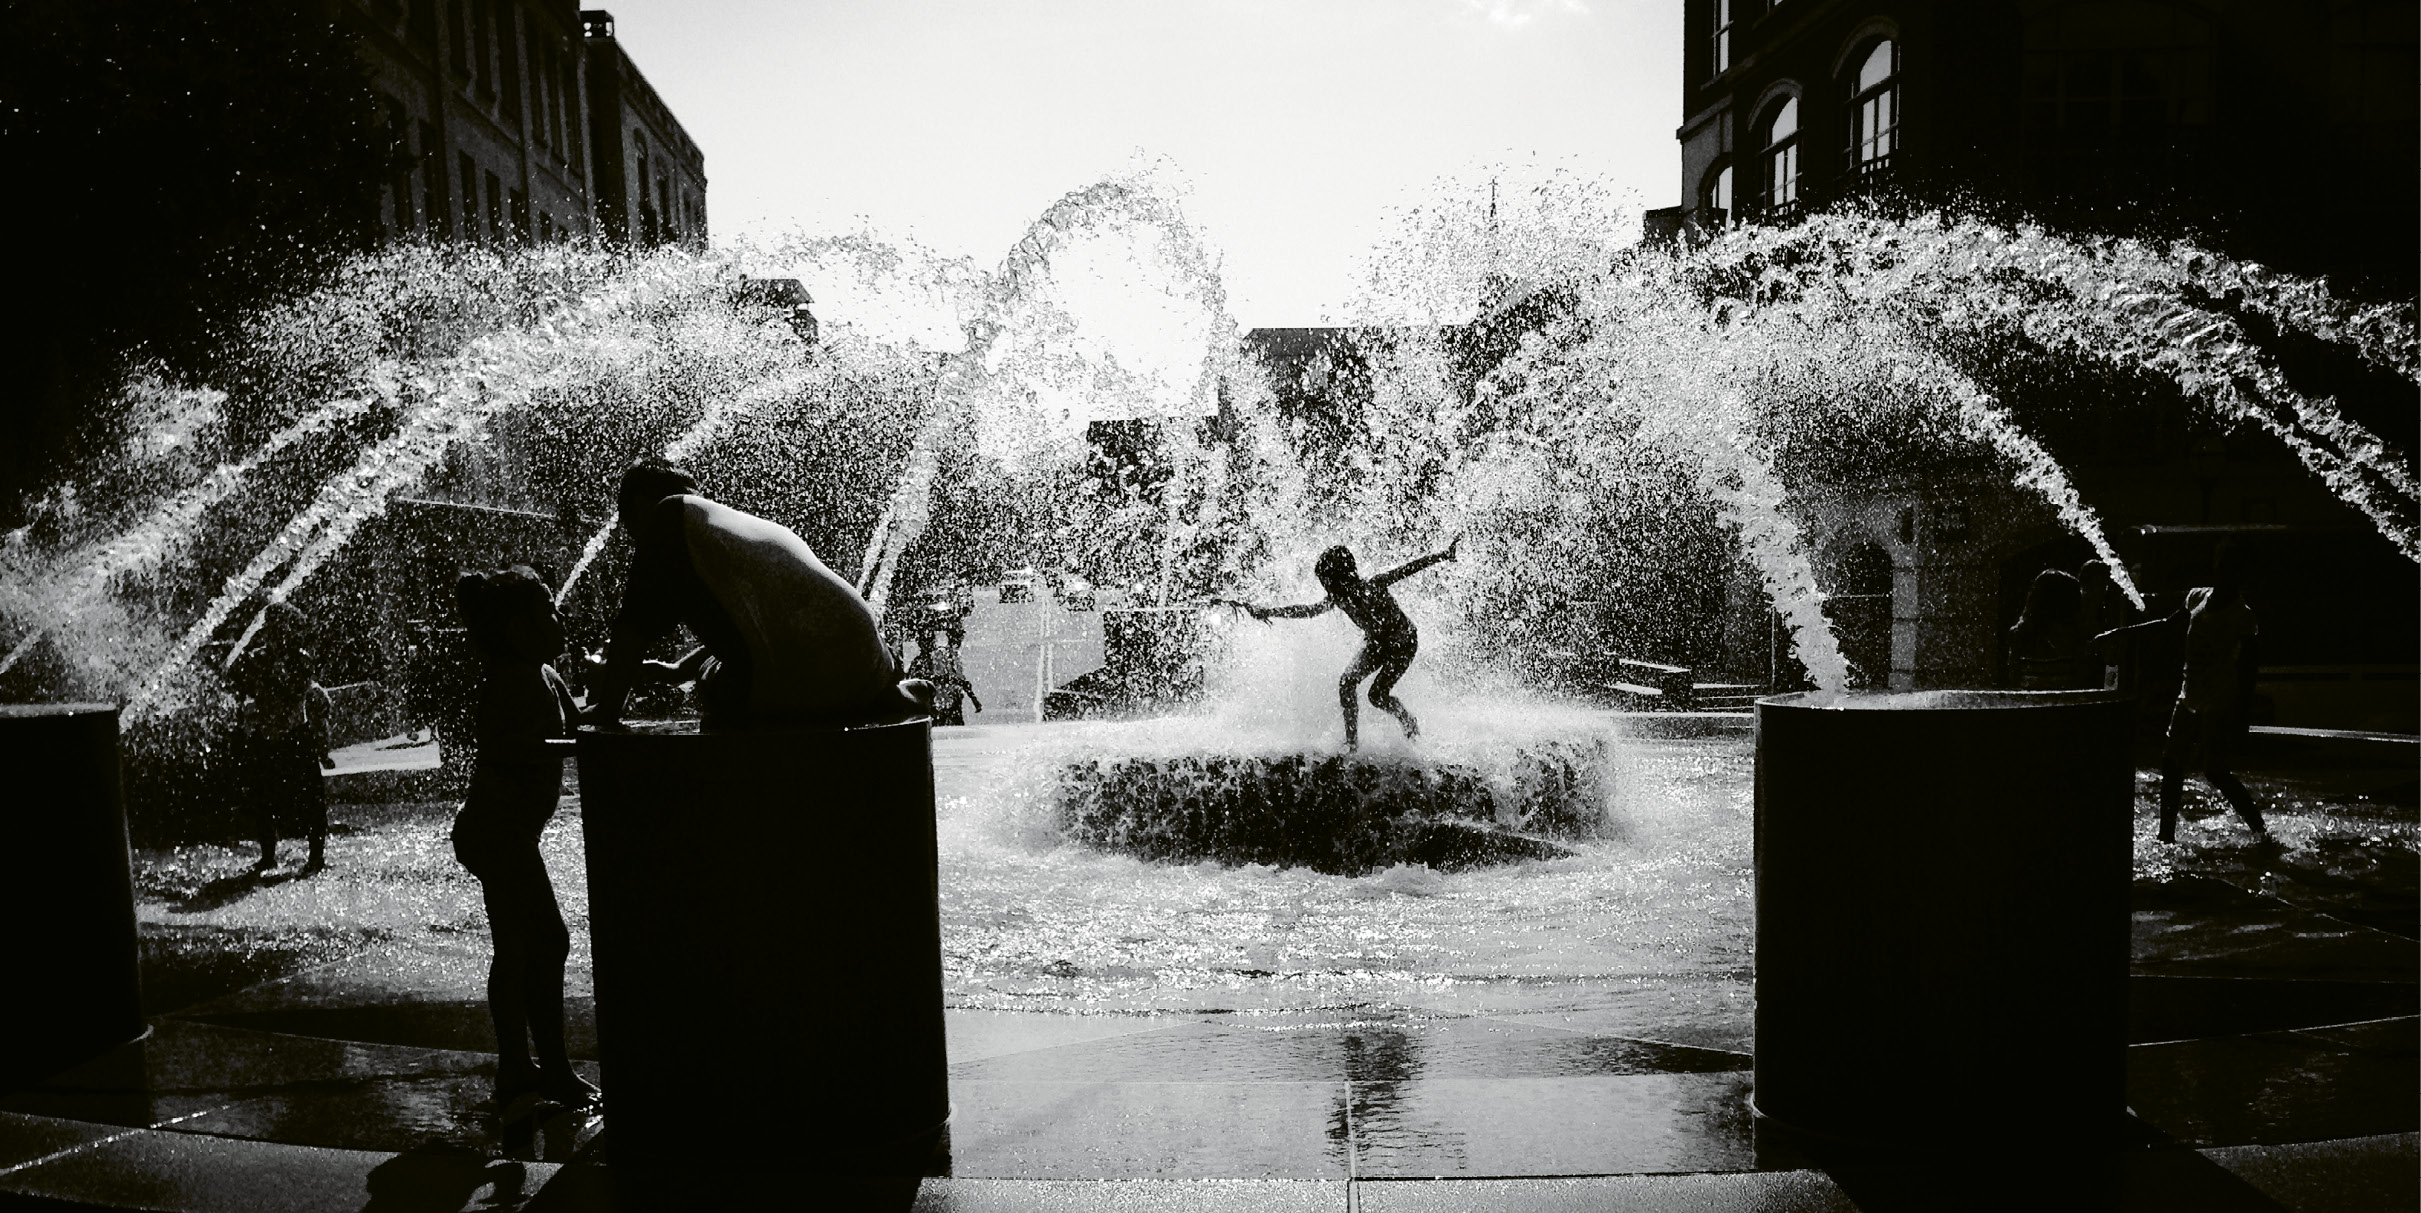 Hot fun in the City by Peggy Archambault  {Amateur category} - A steamy day at  Waterfront Park